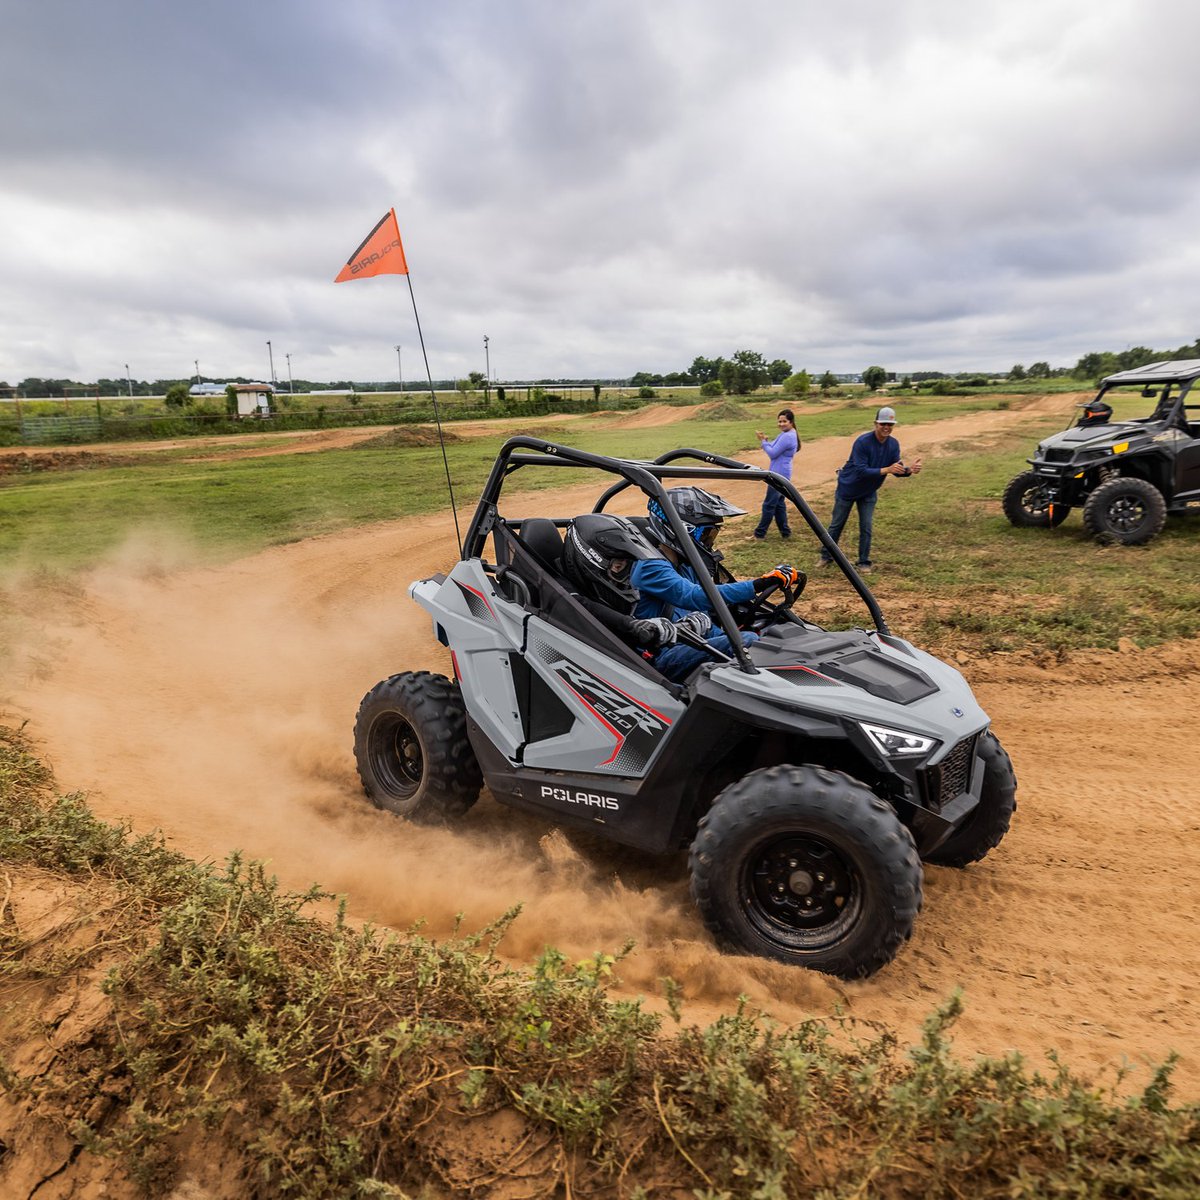 Accessories designed for the RZR 200 EFI add protection, comfort and performance to encourage you to continue exploring.
-
#polaris #polarisindia #rzr200efi #youthrzr #rzr #sxs #utv #offroad #youth #SafetyTechnology